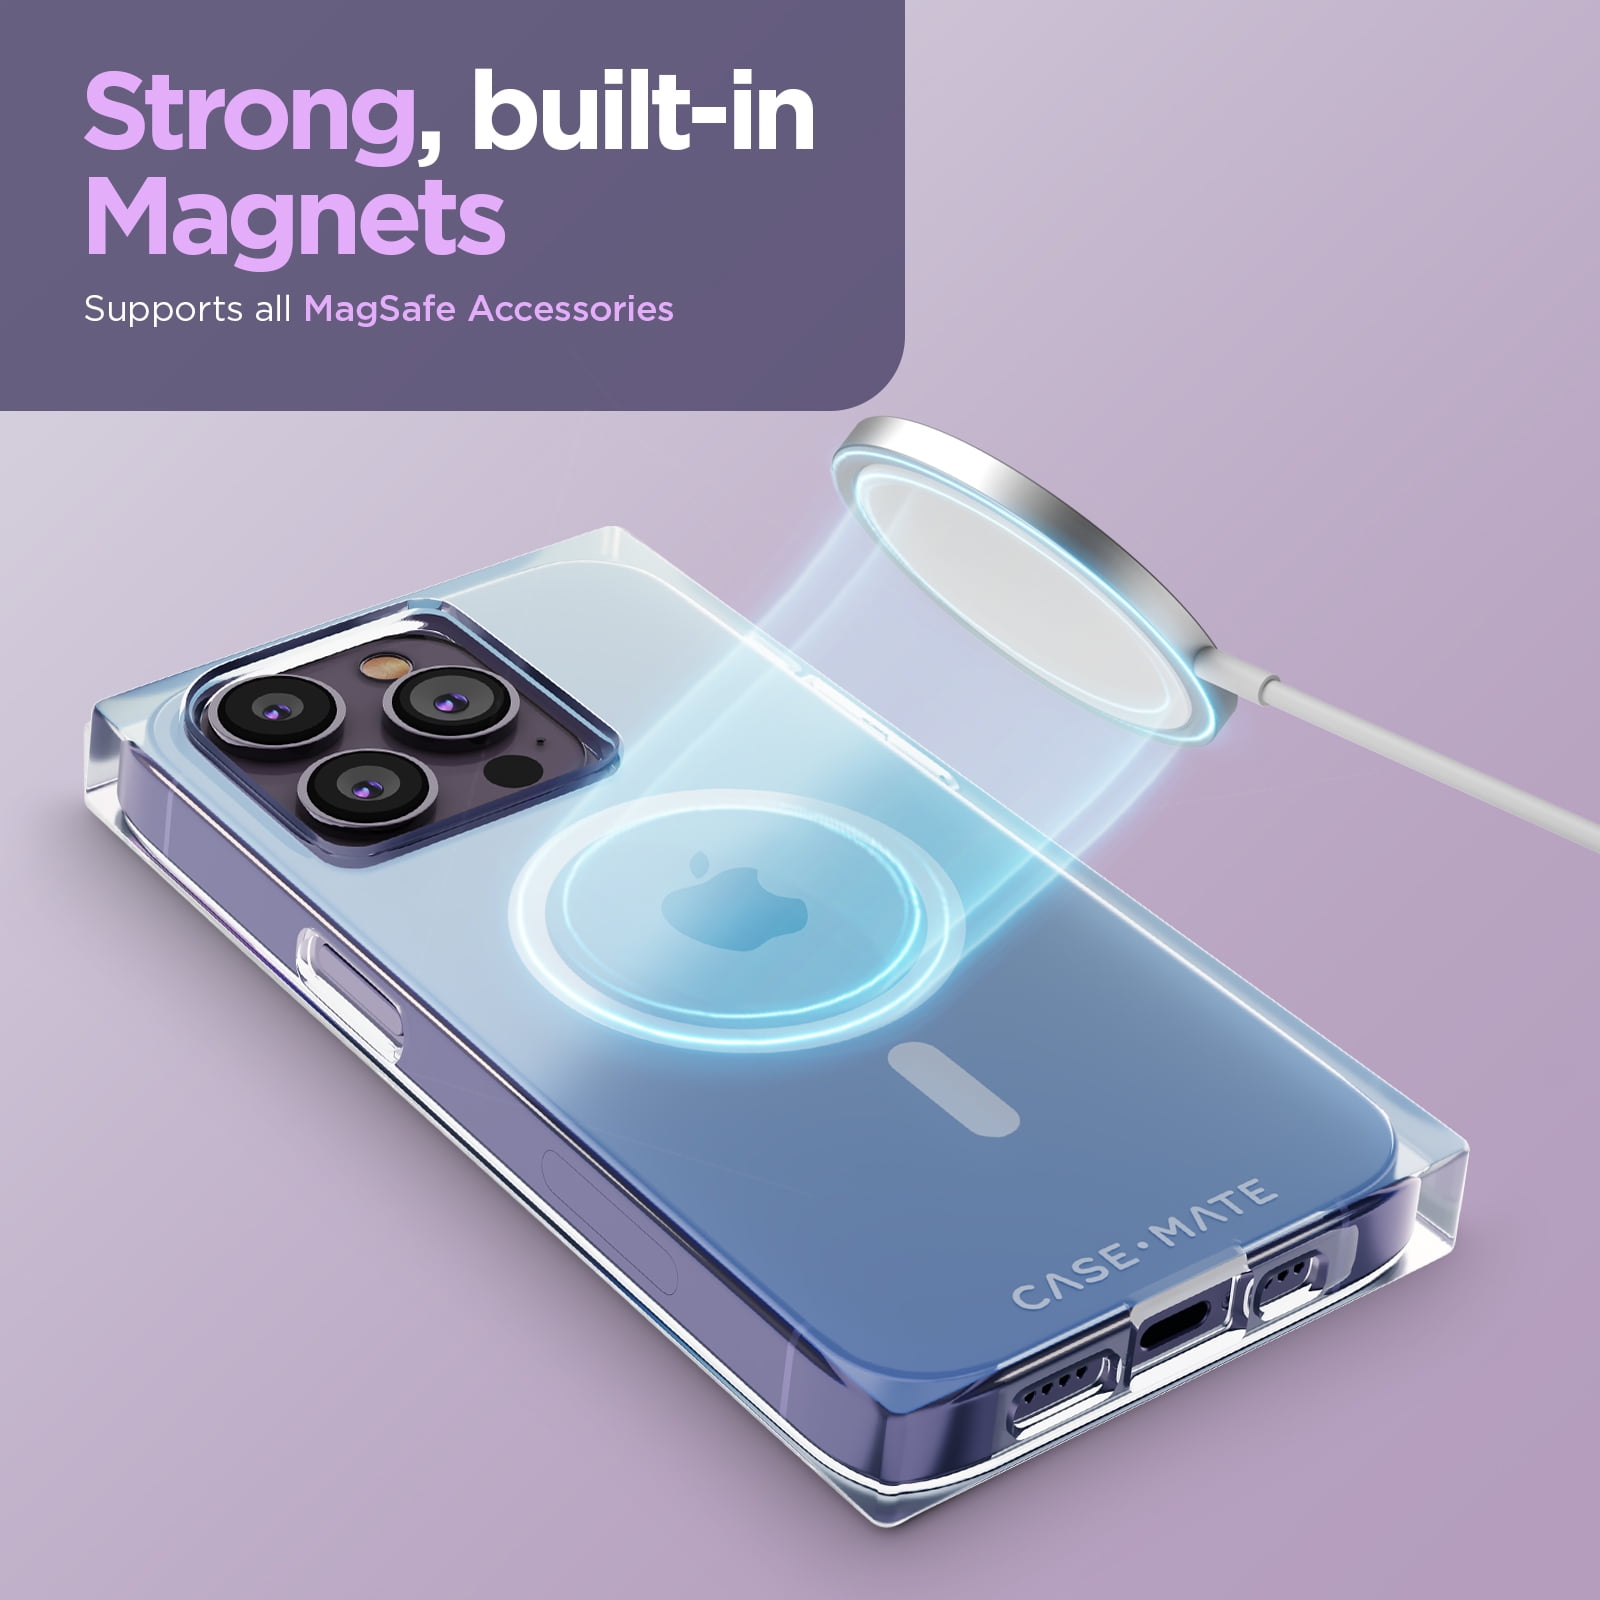 Case-Mate Icebox Facet Midnight Navy (MagSafe) - iPhone 14 Pro Max